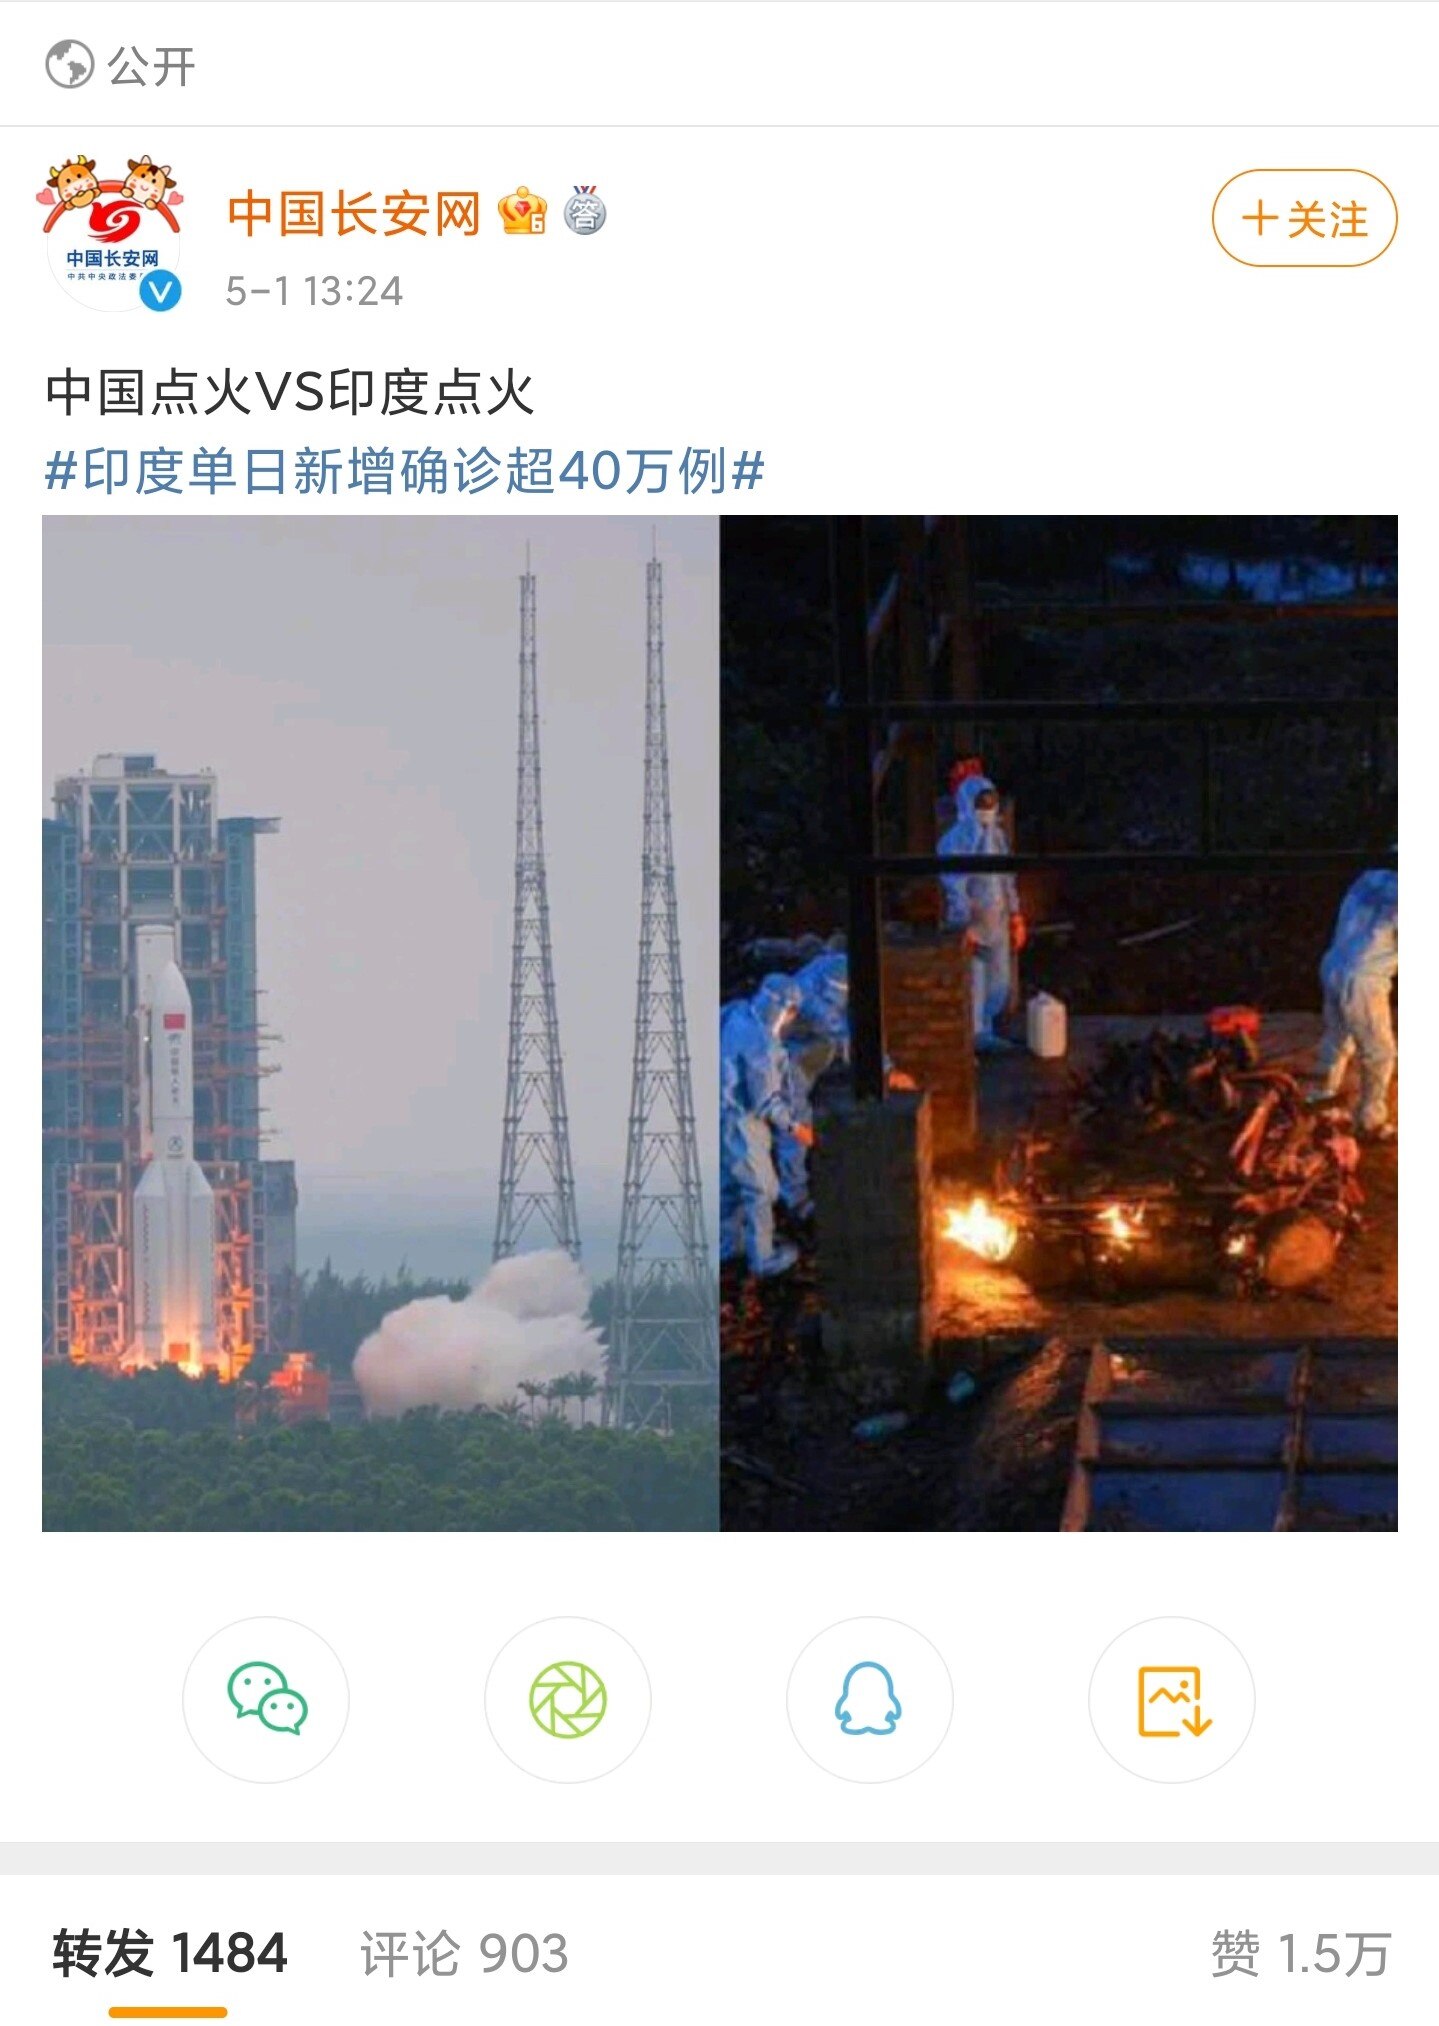 A social media post juxtaposes a Chinese rocket taking of with a mass cremation in India